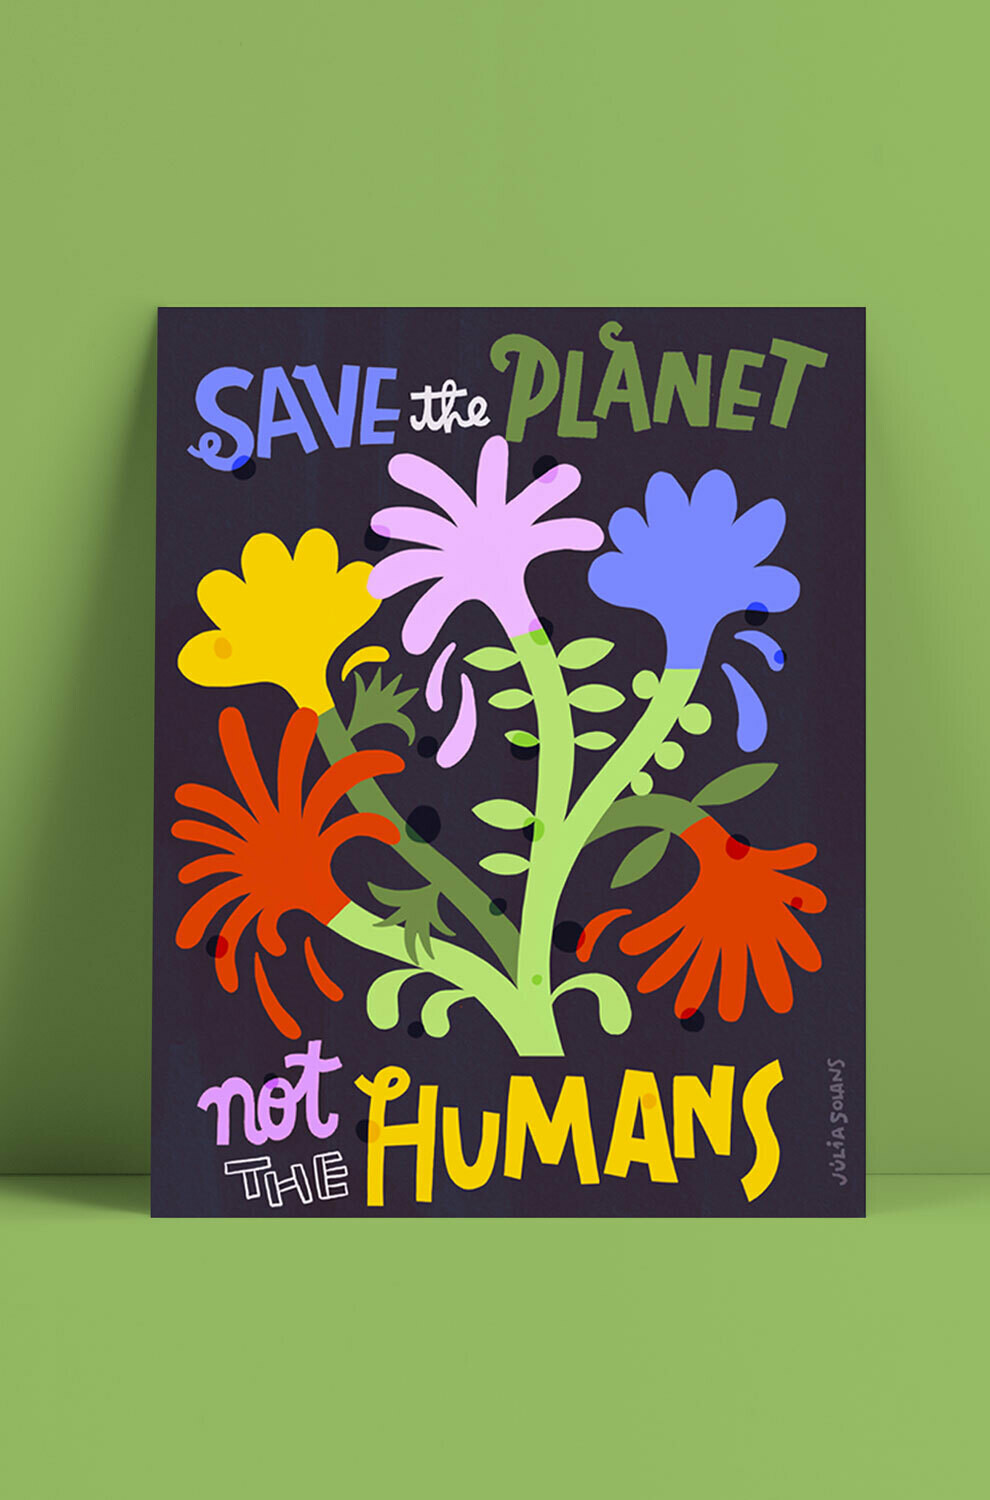 Save the Planet, not the humans